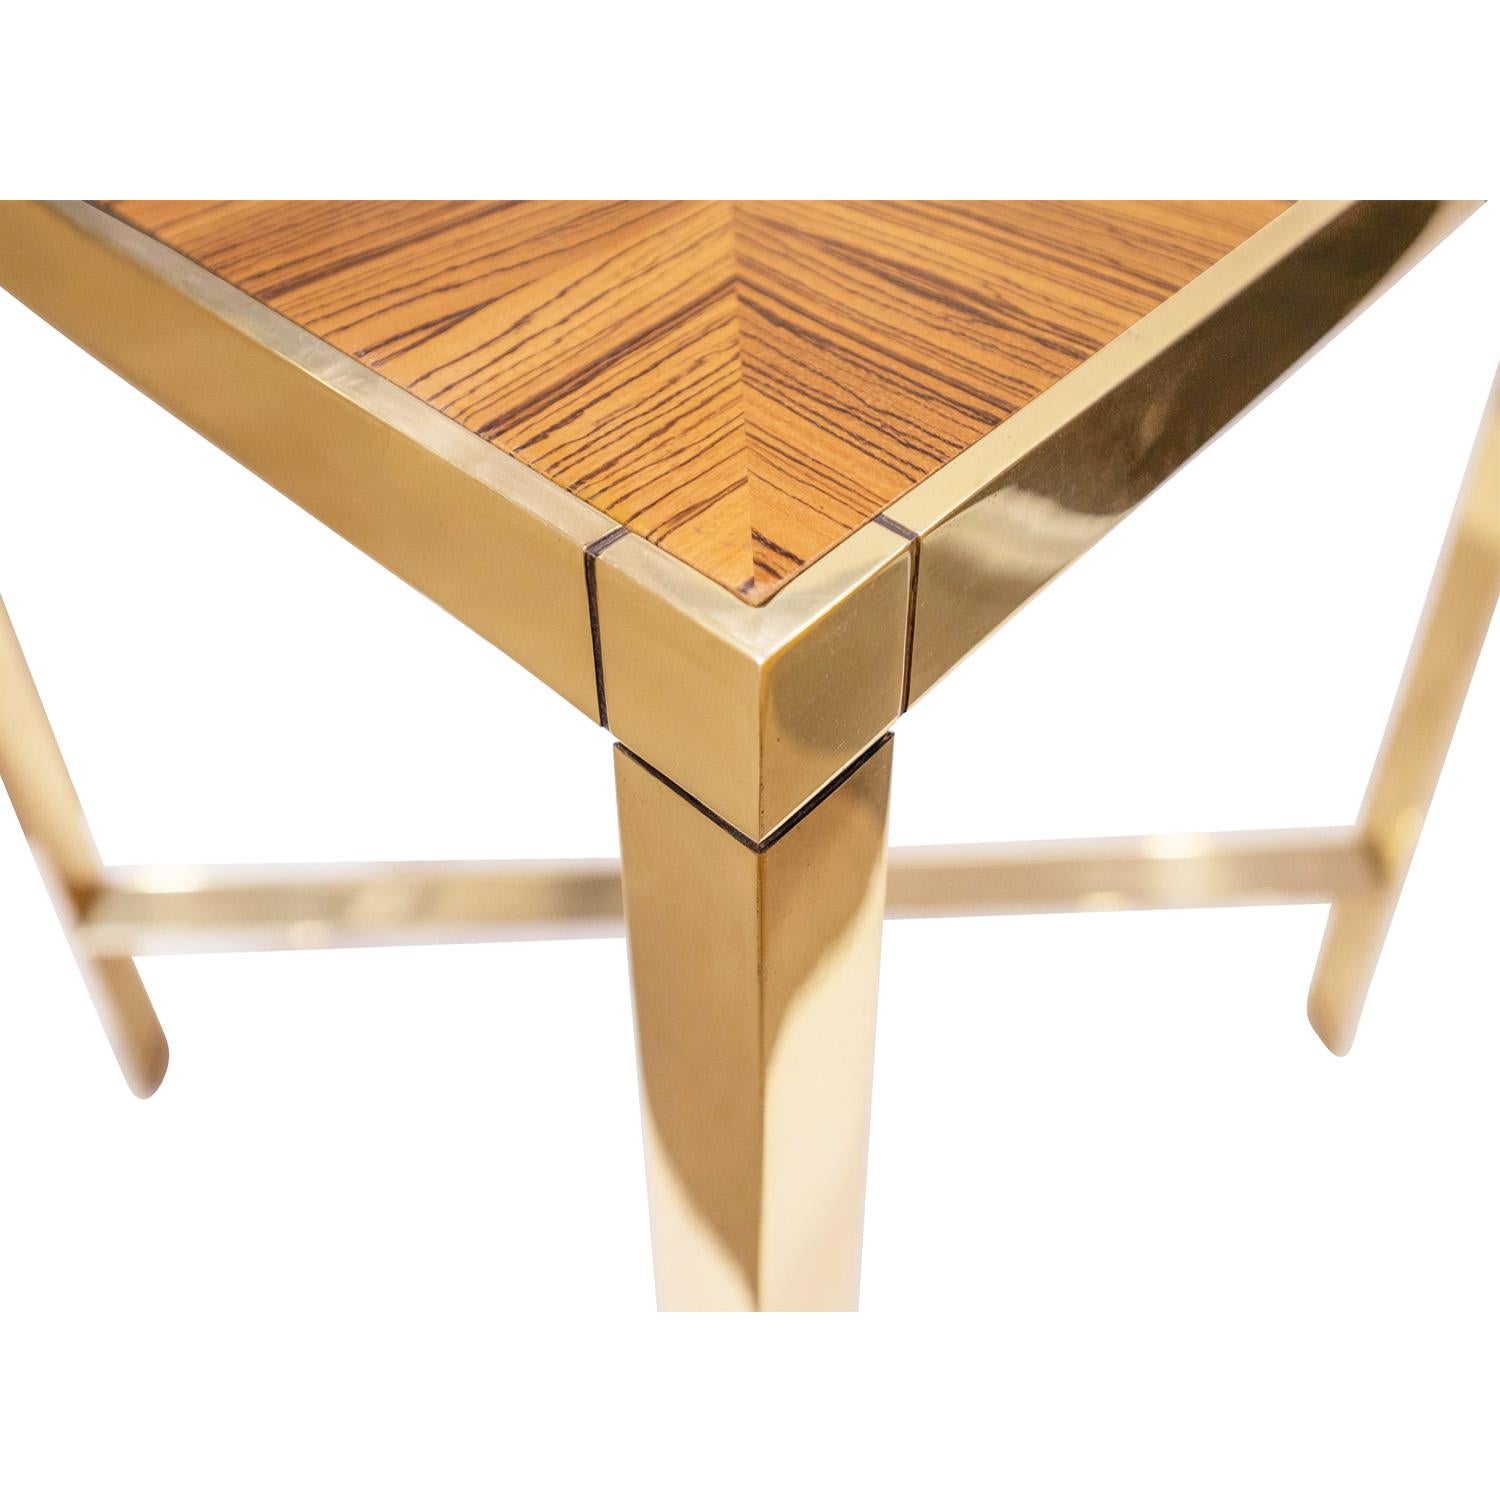 Hand-Crafted Karl Springer Superbly Crafted End Table in Brass with Zebra Wood Top, 1980s For Sale